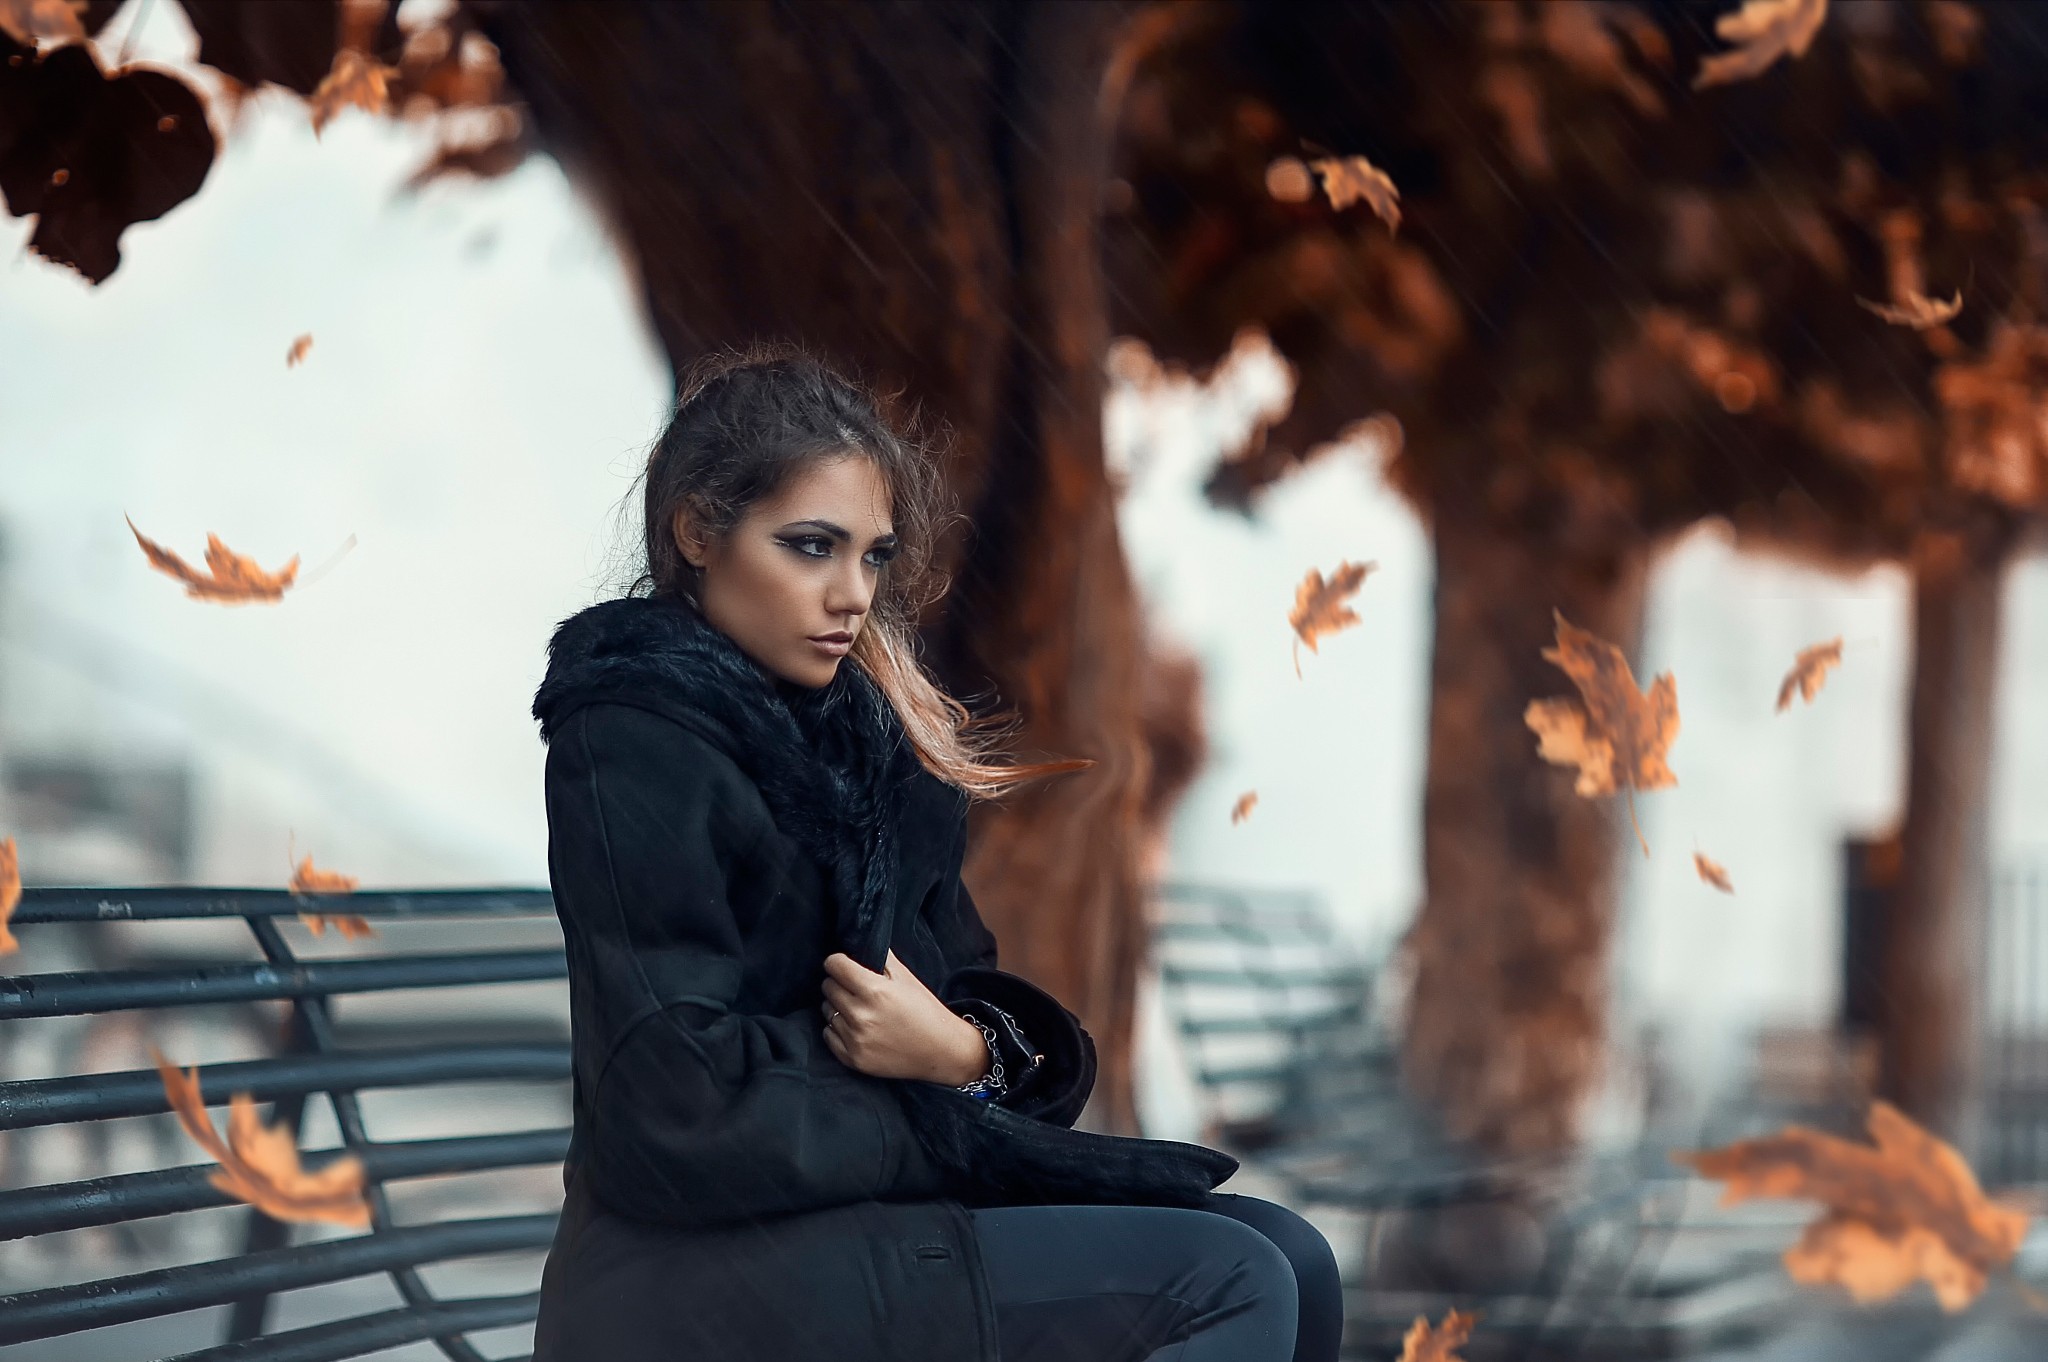 Women Leaves Bench Women Outdoors Fall Alessandro Di Cicco Black Coat On Bench Sweet Ary Coats 2048x1362